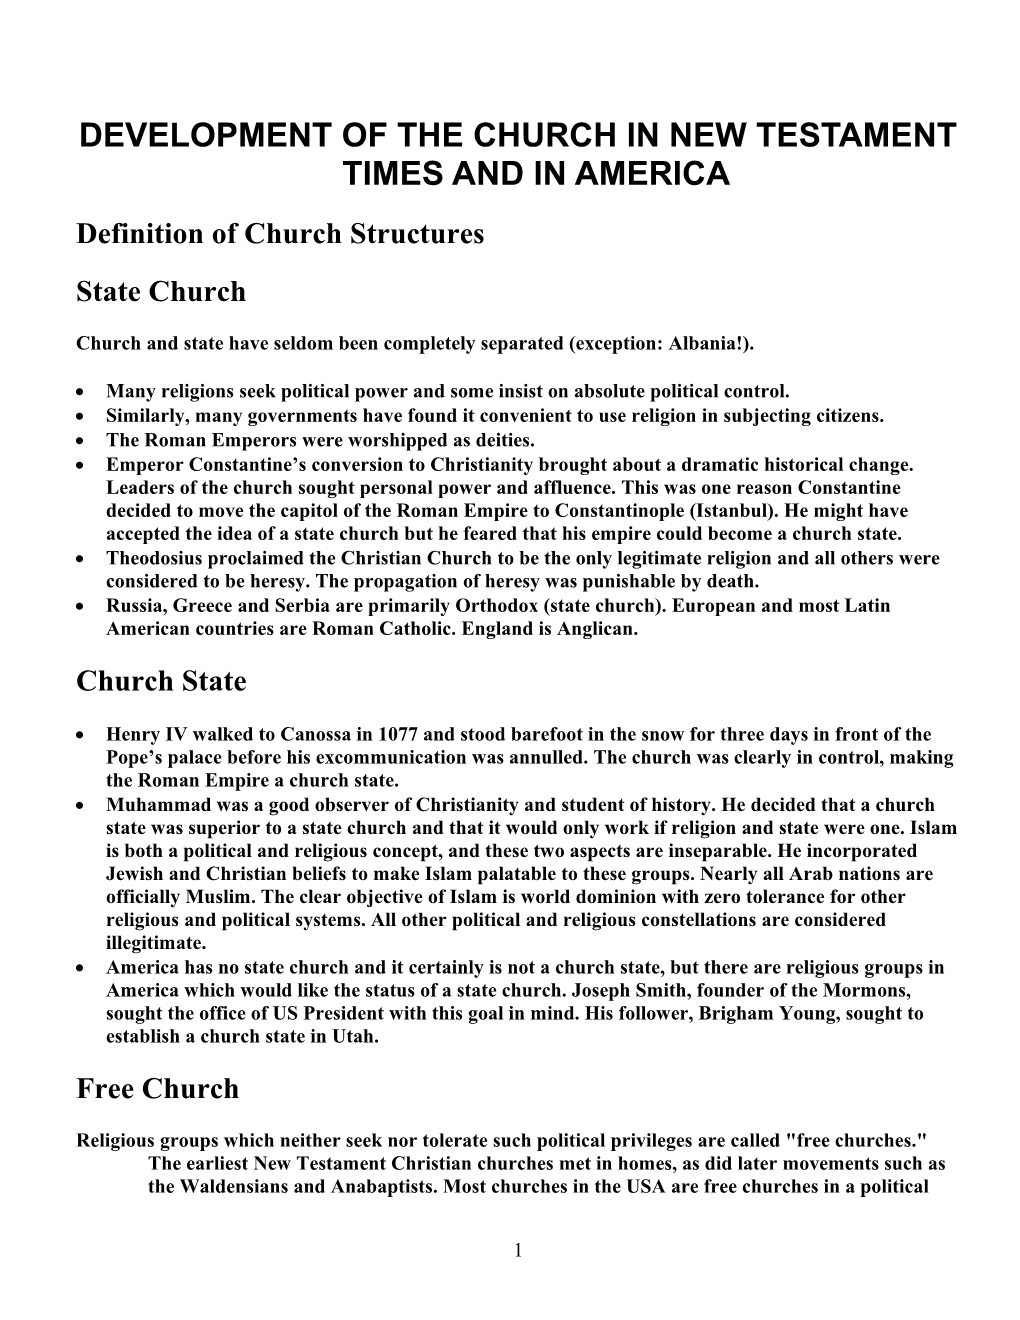 Development of the Church in New Testament Times and in America